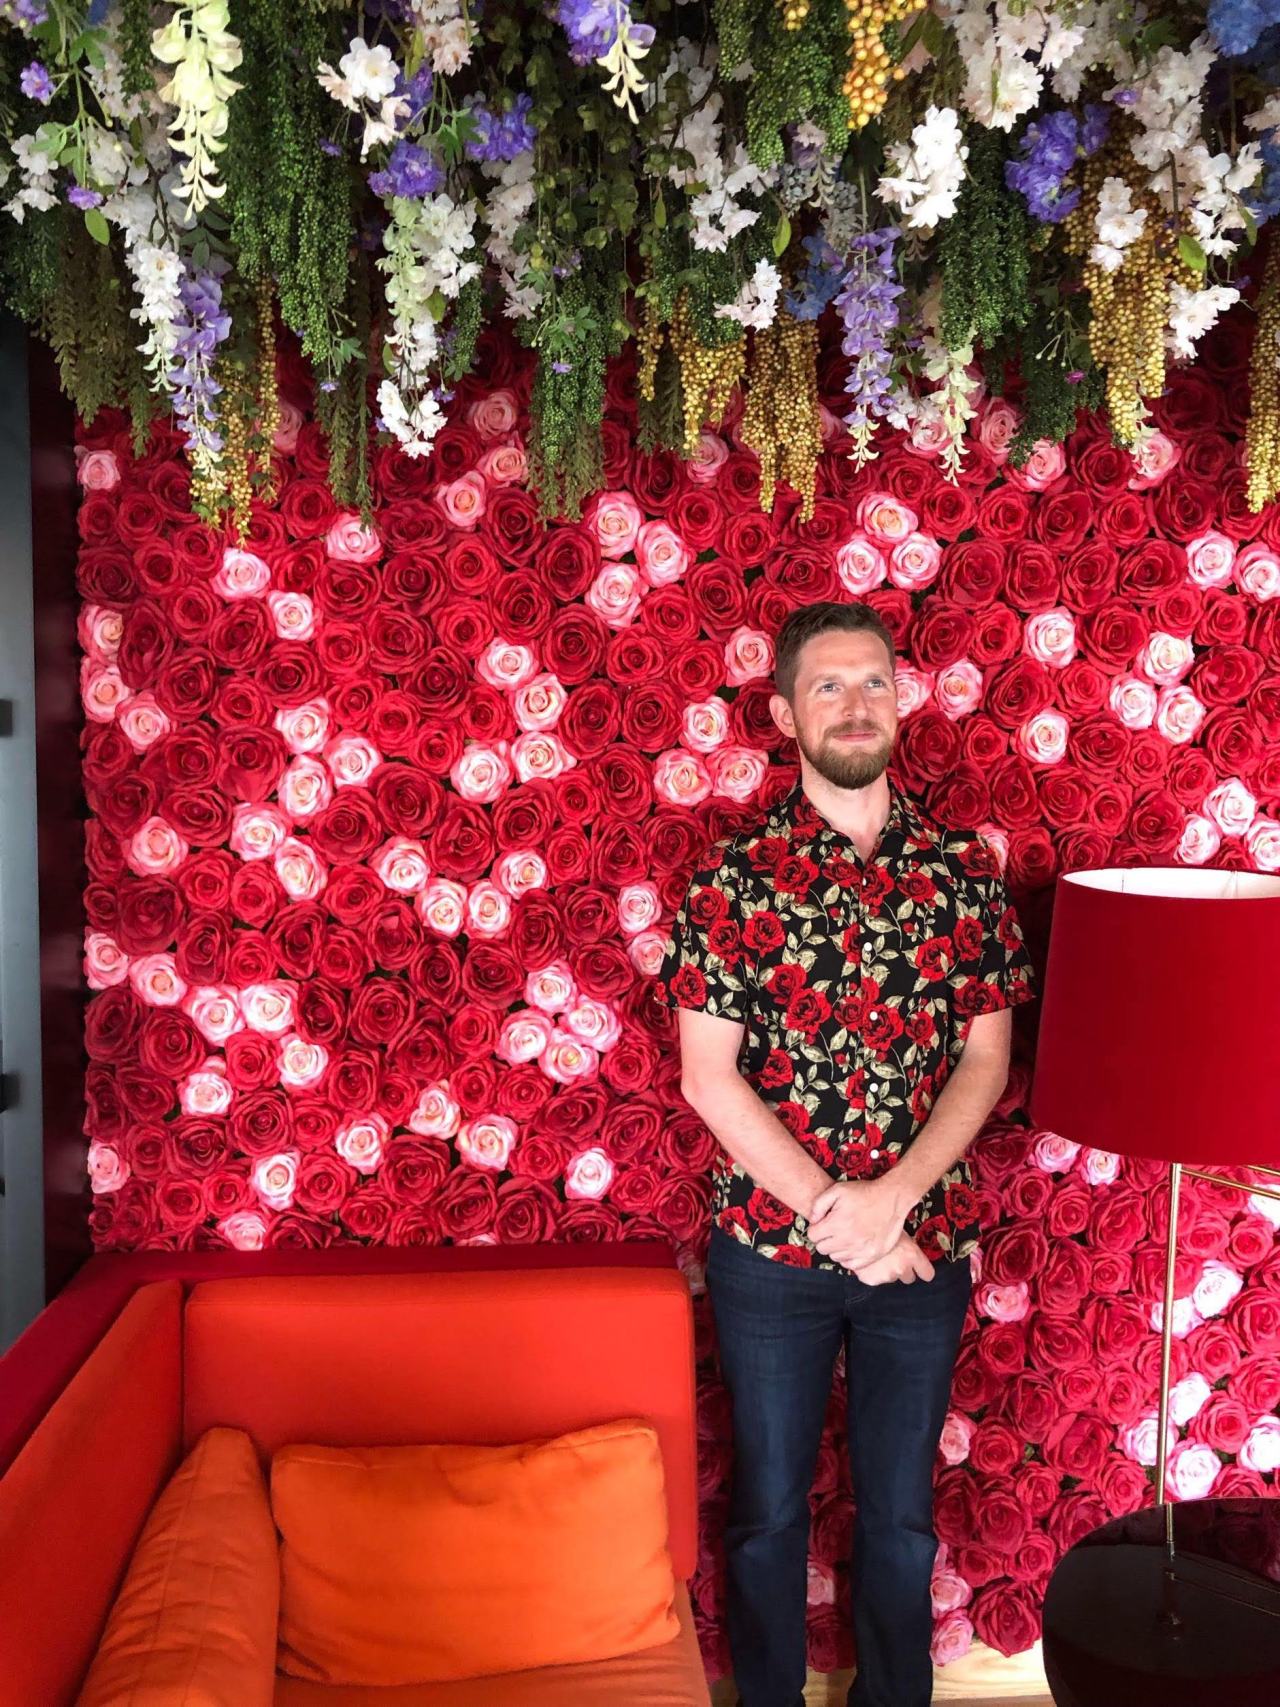 Me, partially camouflaged in Porto, Portugal last July, as I was optimistically exploring prior to the WordCamp EU that was supposed to happen there this month. It?s all moved online now, and I will be speaking alongside Matias shortly:...